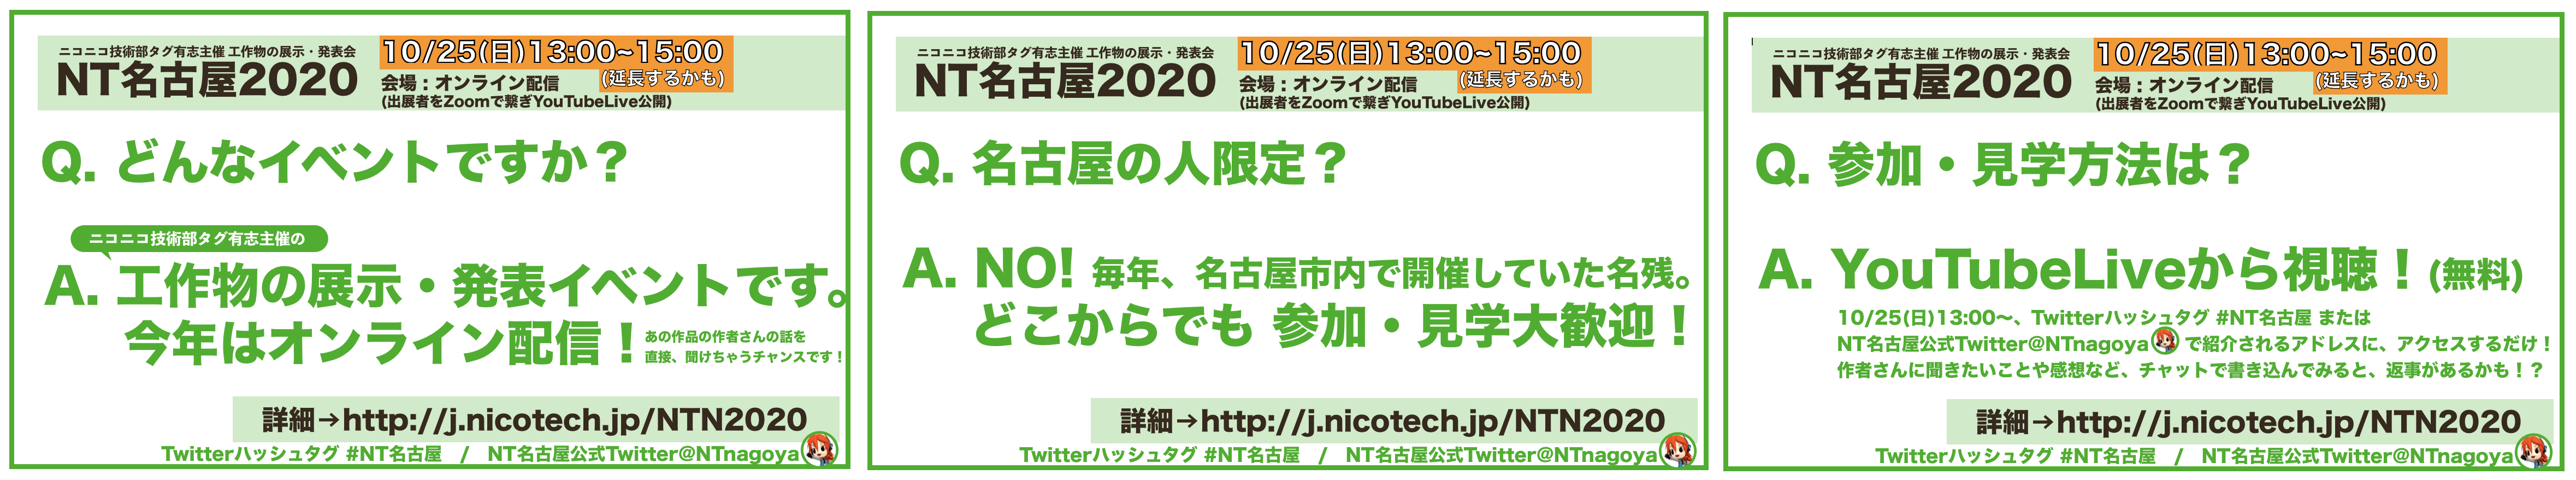 NT名古屋2020_1018_5.png